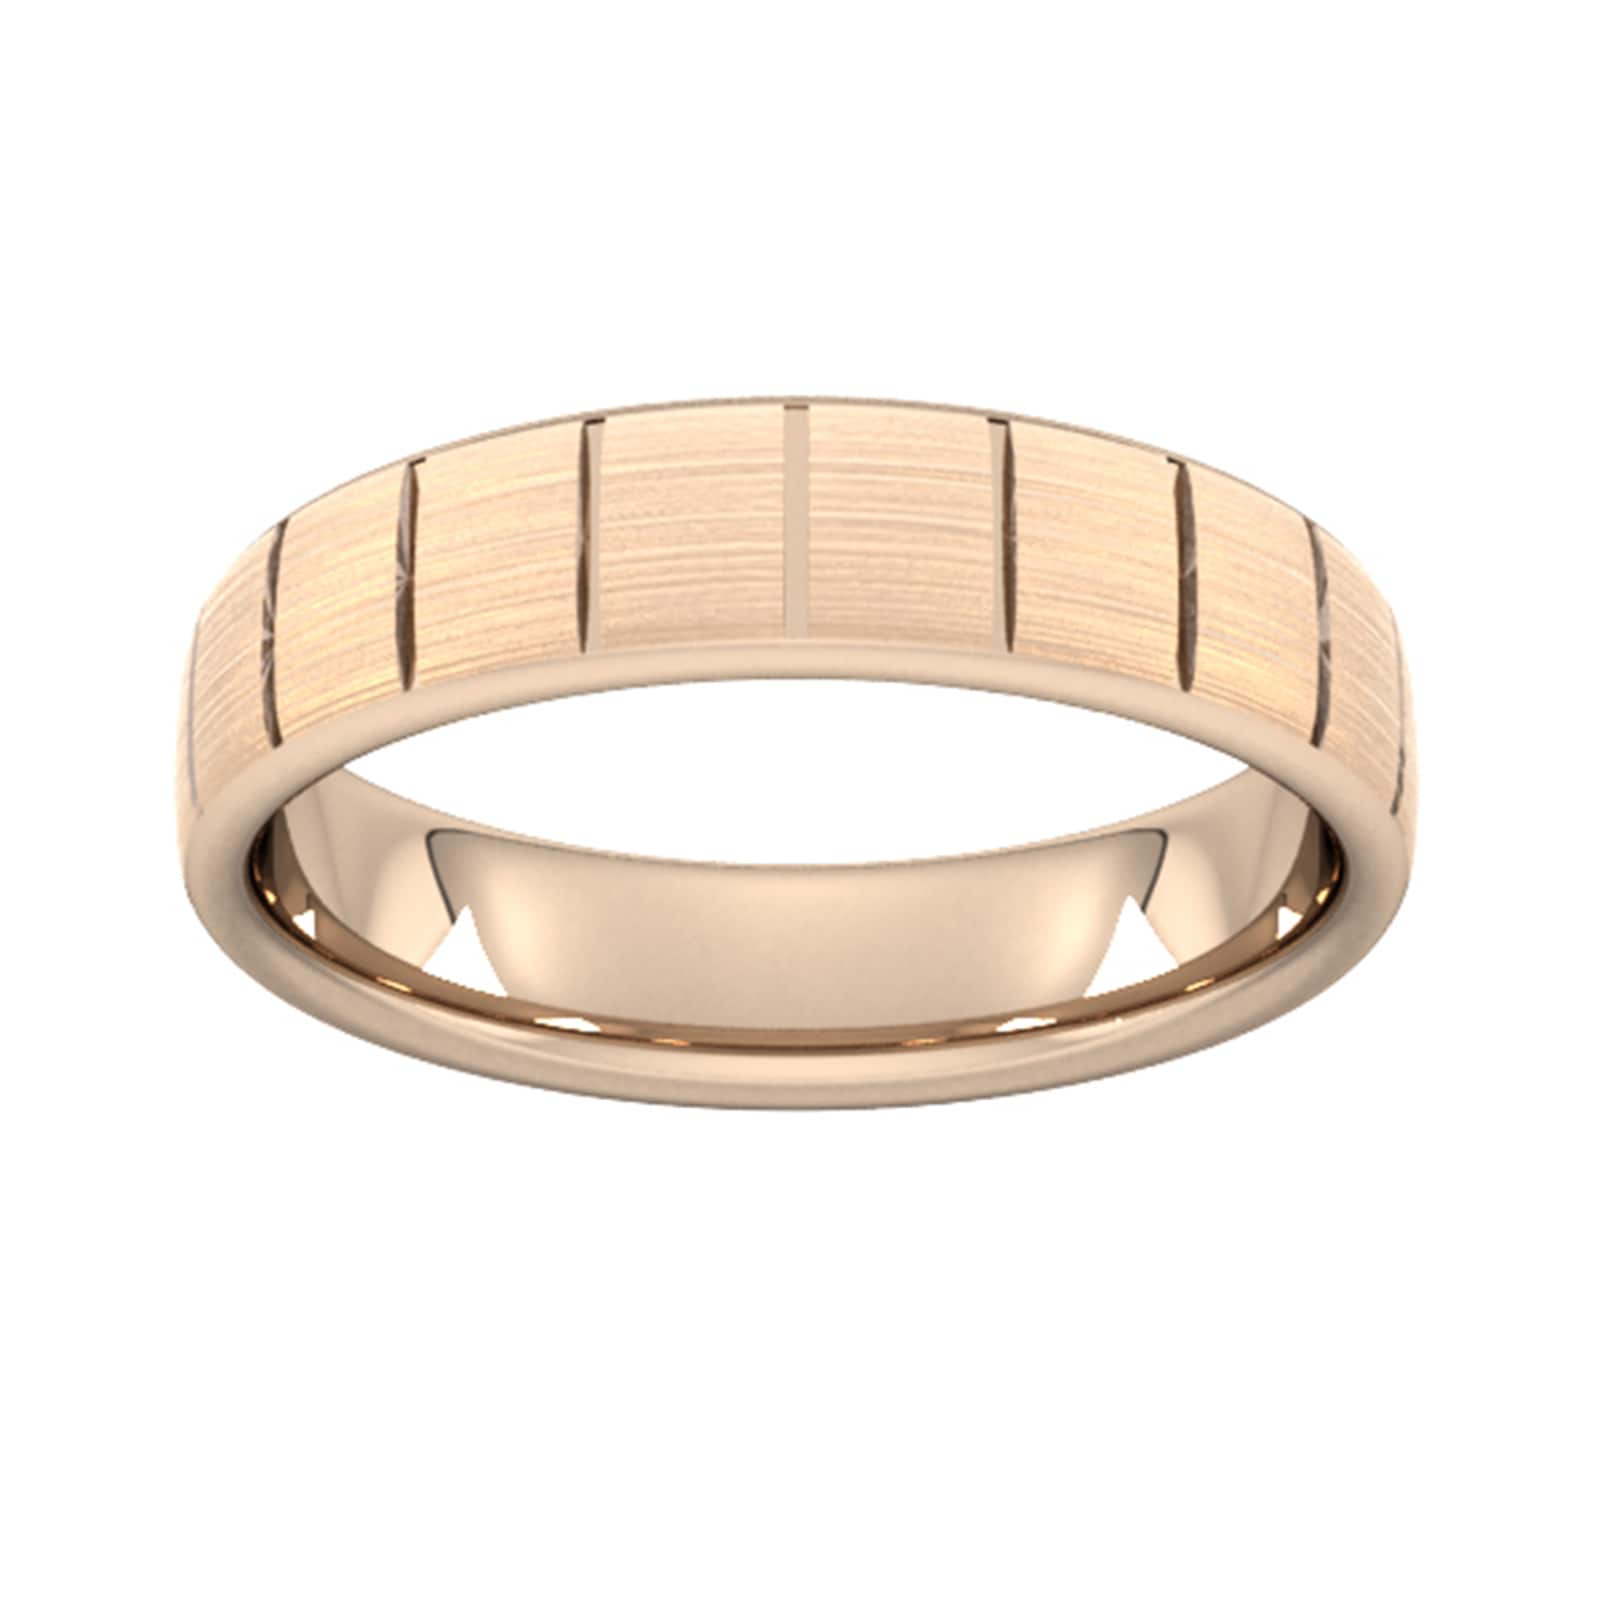 5mm Slight Court Heavy Vertical Lines Wedding Ring In 18 Carat Rose Gold - Ring Size W